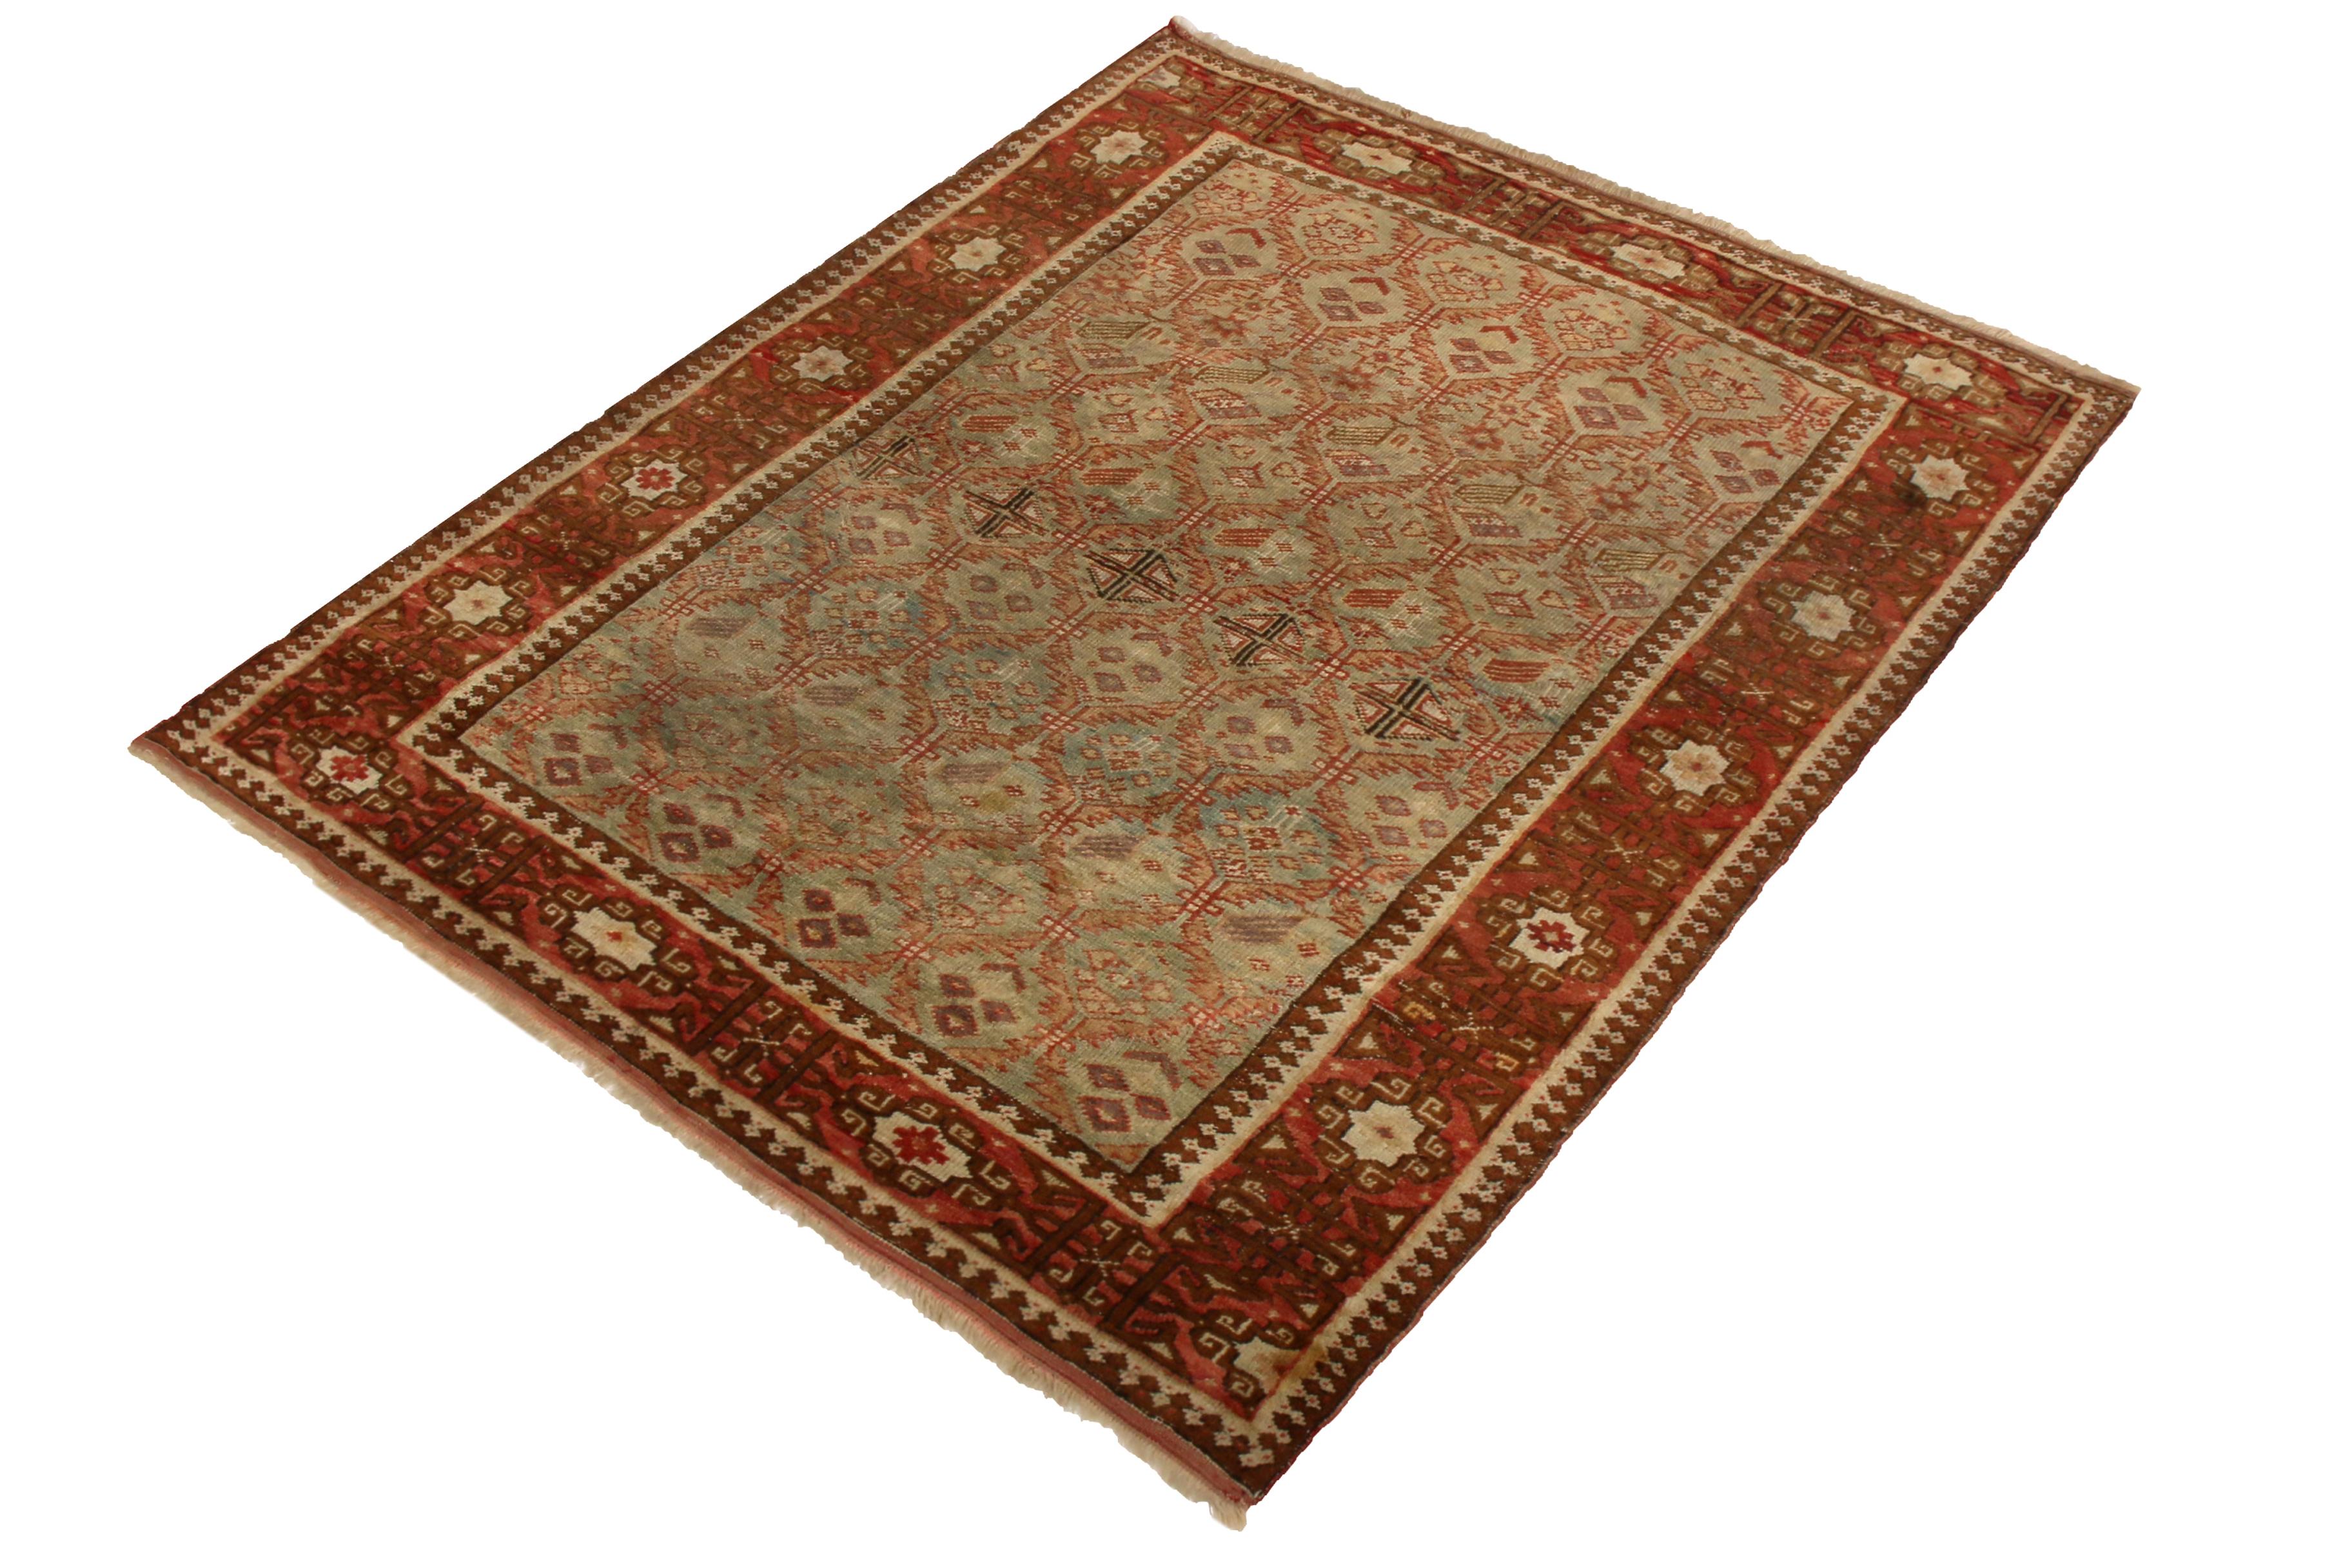 Hand knotted in wool originating from Russia between 1890-1900, this antique Shirvan rug enjoys an uncommon green background with notes of blue in the field, a rare but natural complement to the classic beige-brown and rich, burnt red traditional